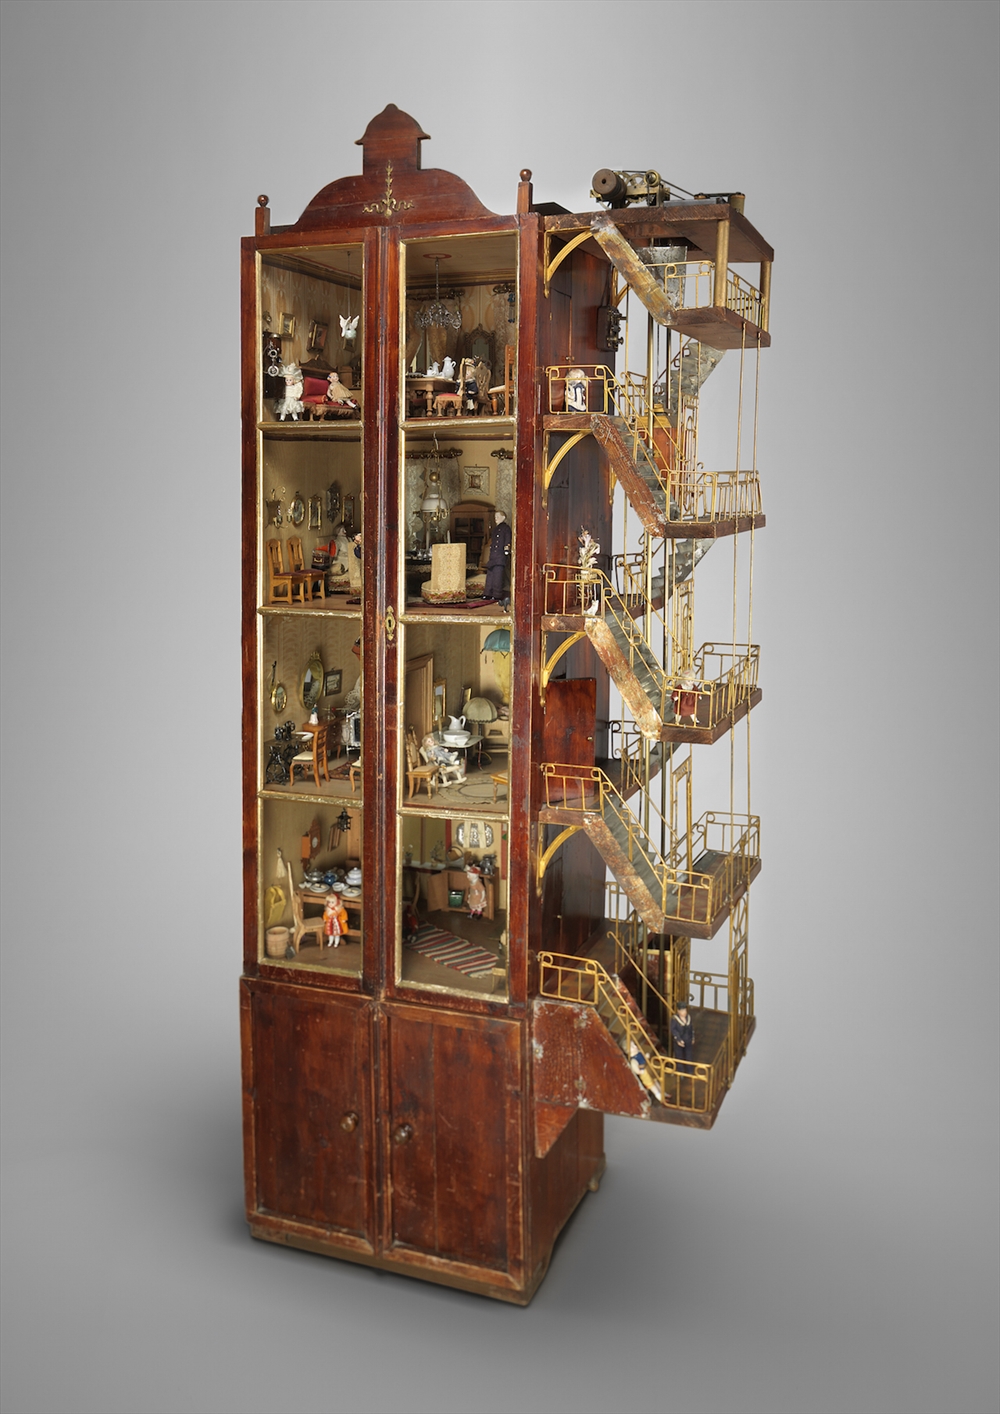 Archisearch THE CHARMING WORLD OF SWEDISH WOODEN TOYS IN THE BARD GRADUATE CENTER GALLERY, NY